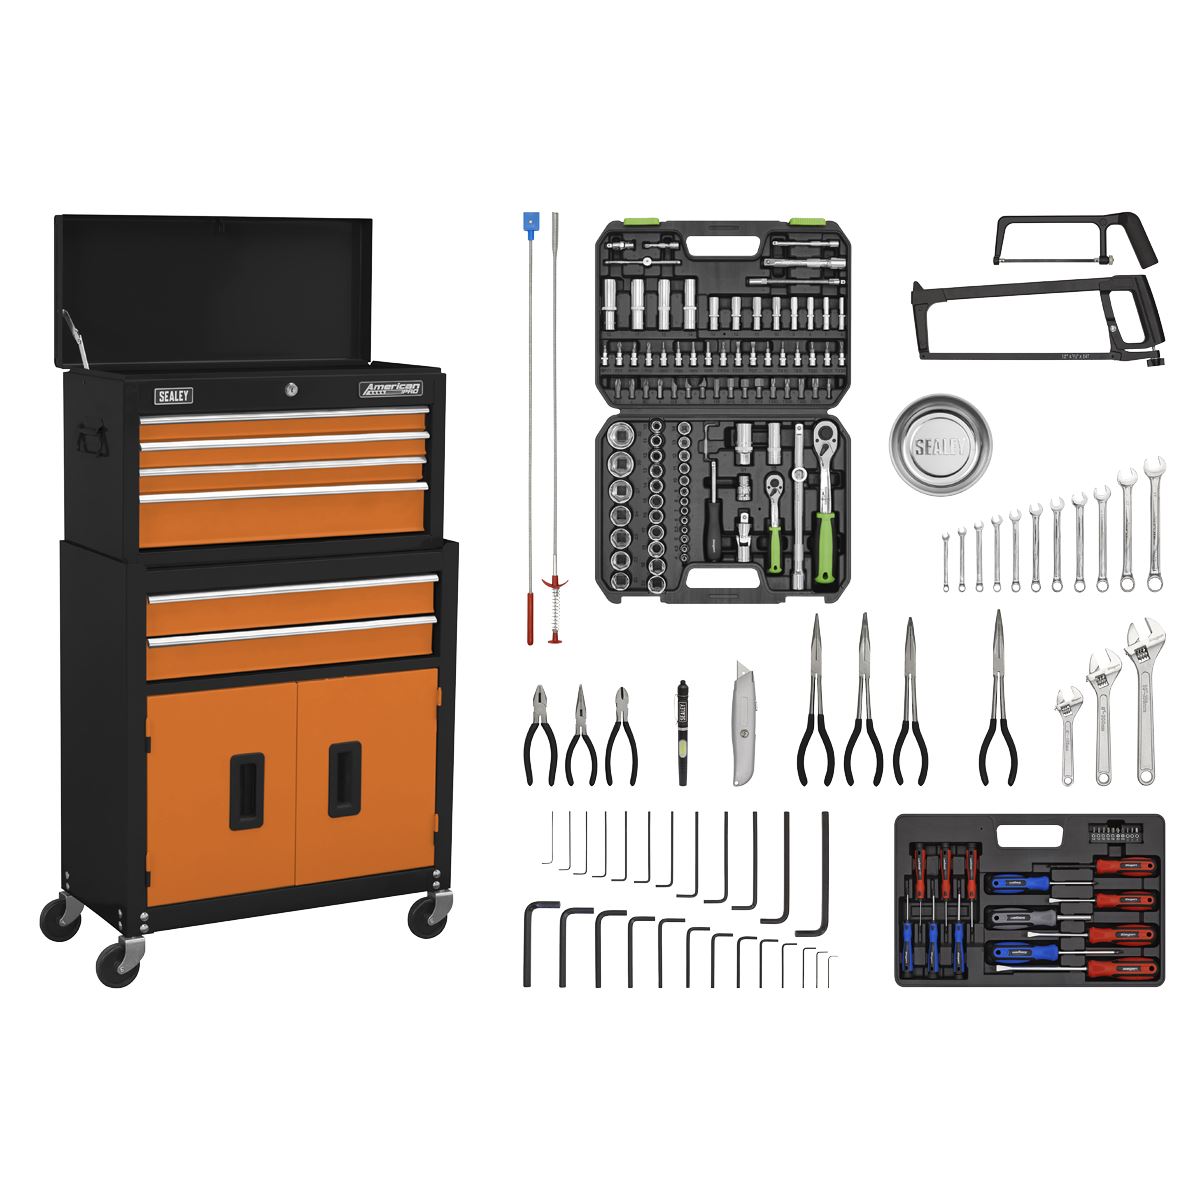 Sealey American Pro Topchest & Rollcab Combination 6 Drawer with Ball-Bearing Slides - Orange/Black & 170pc Tool Kit